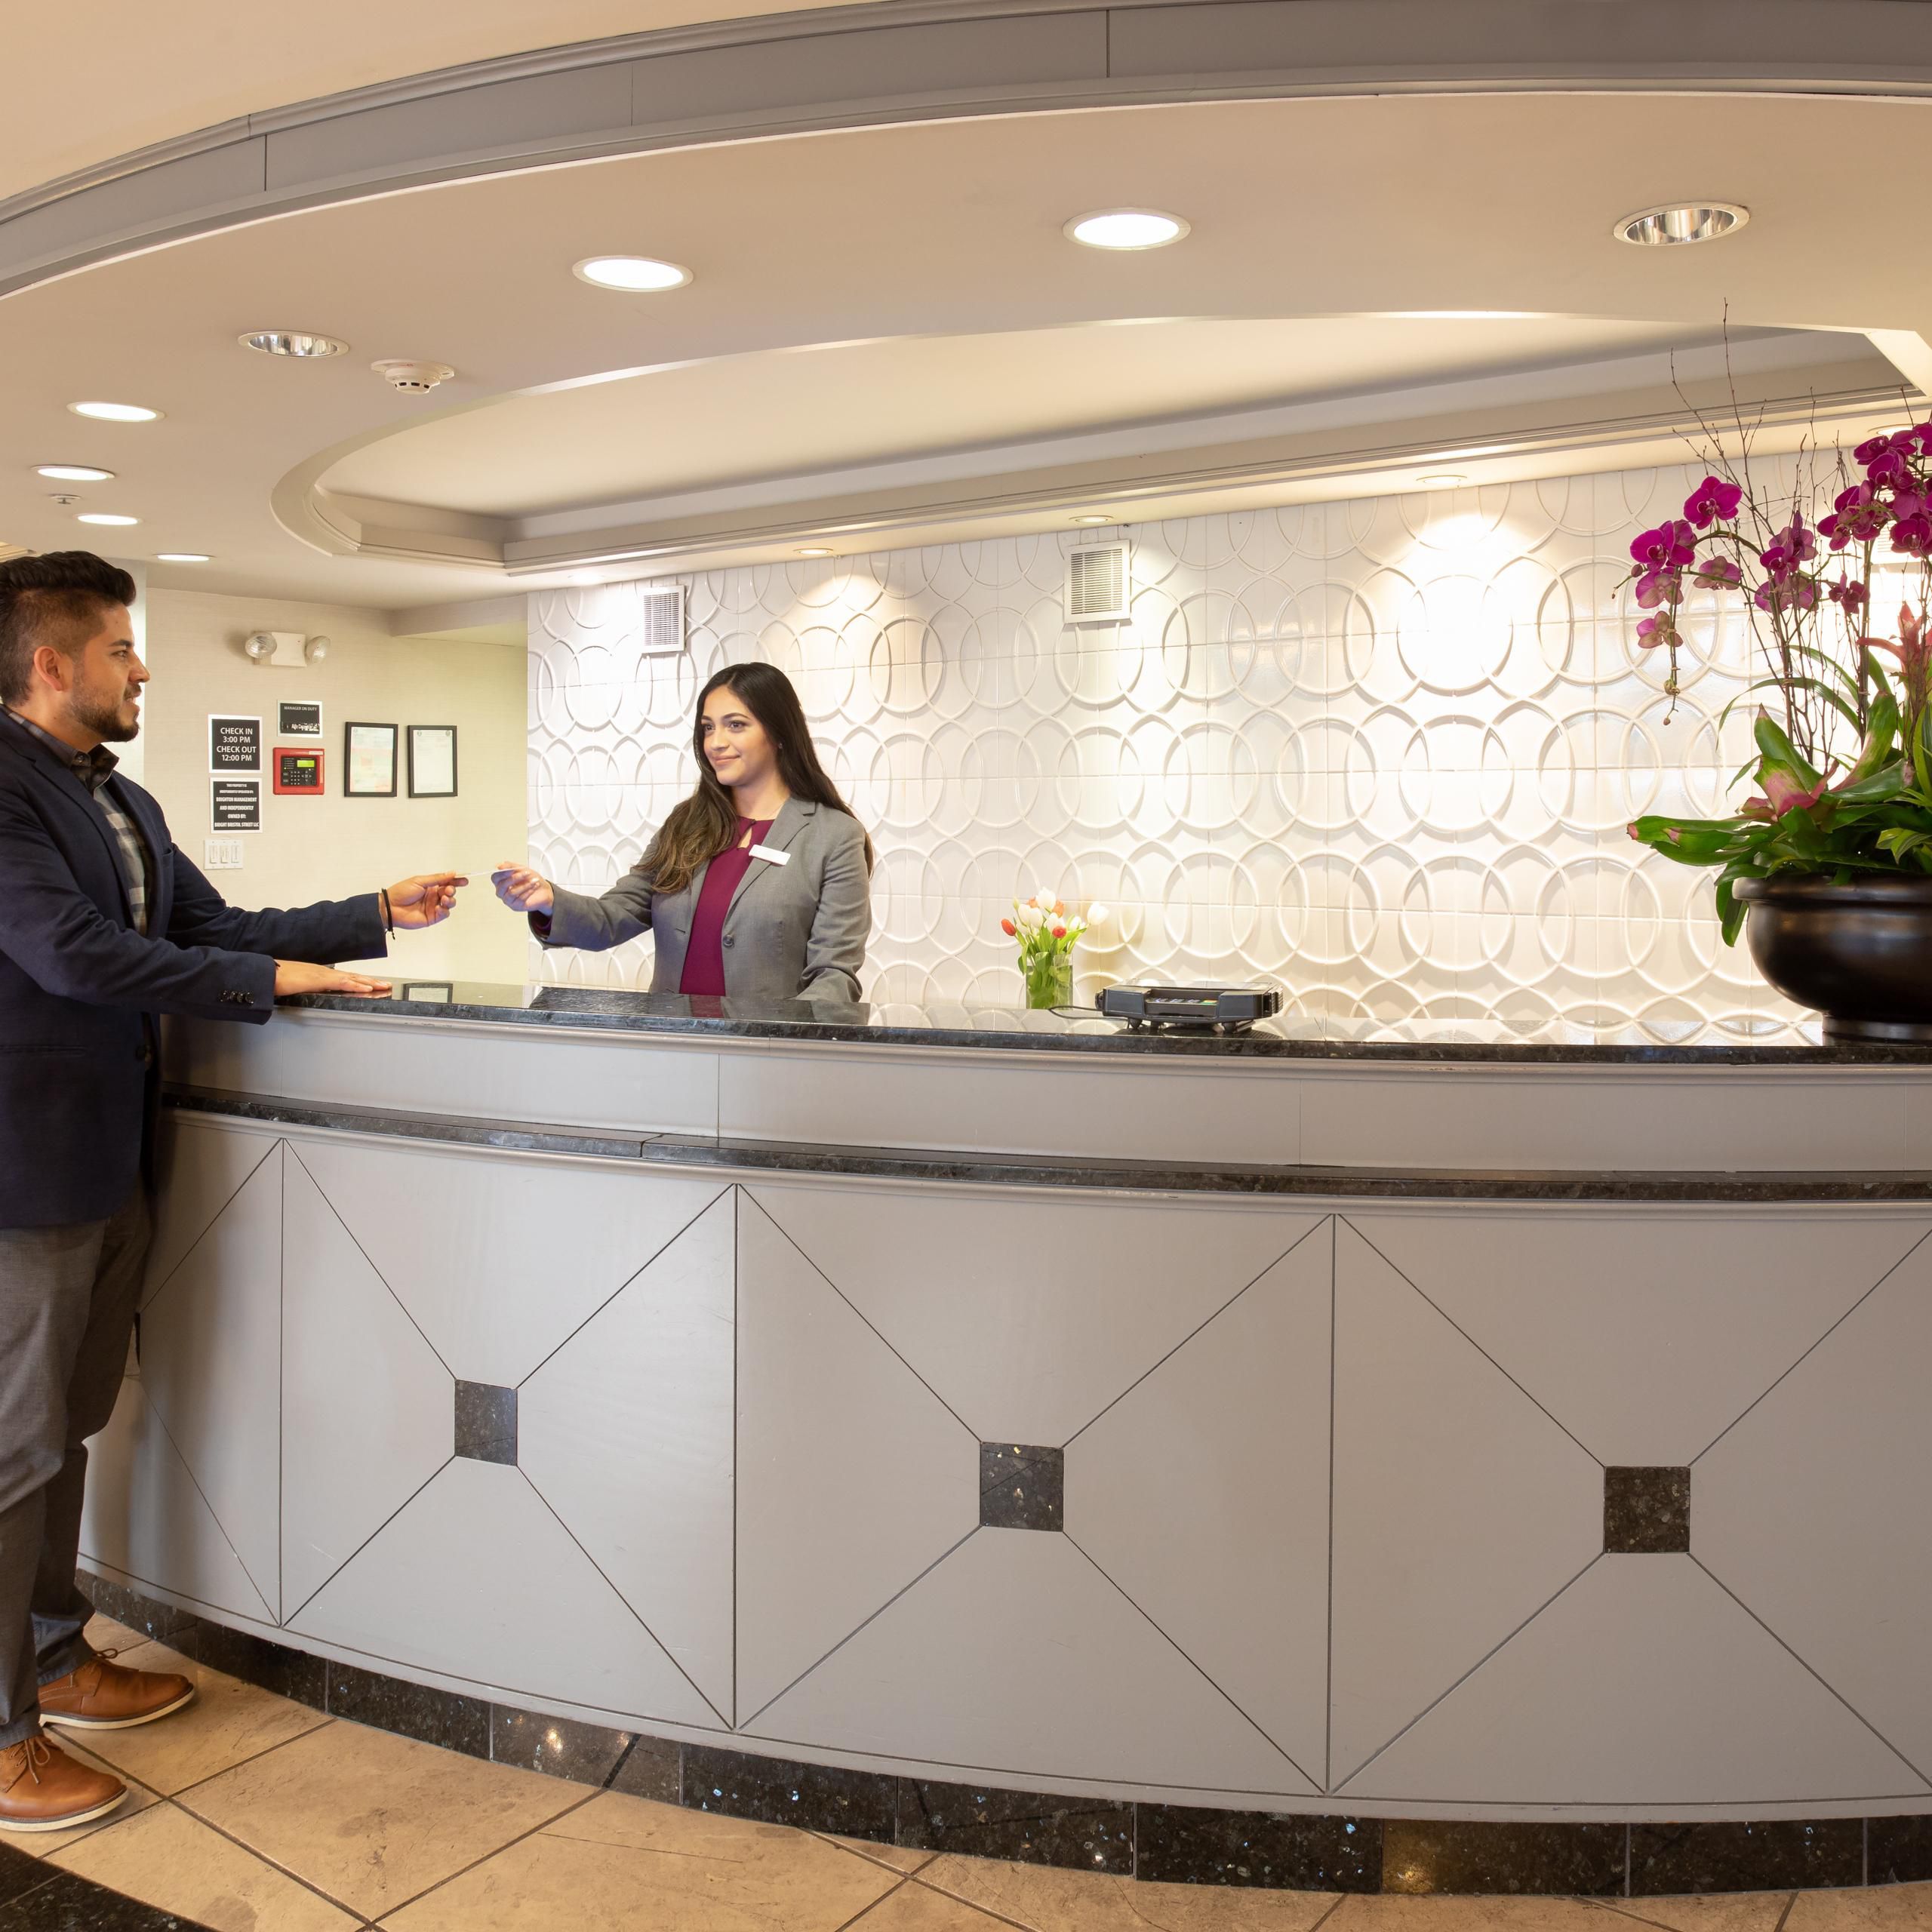  Front Desk Staff can provide information on local attractions